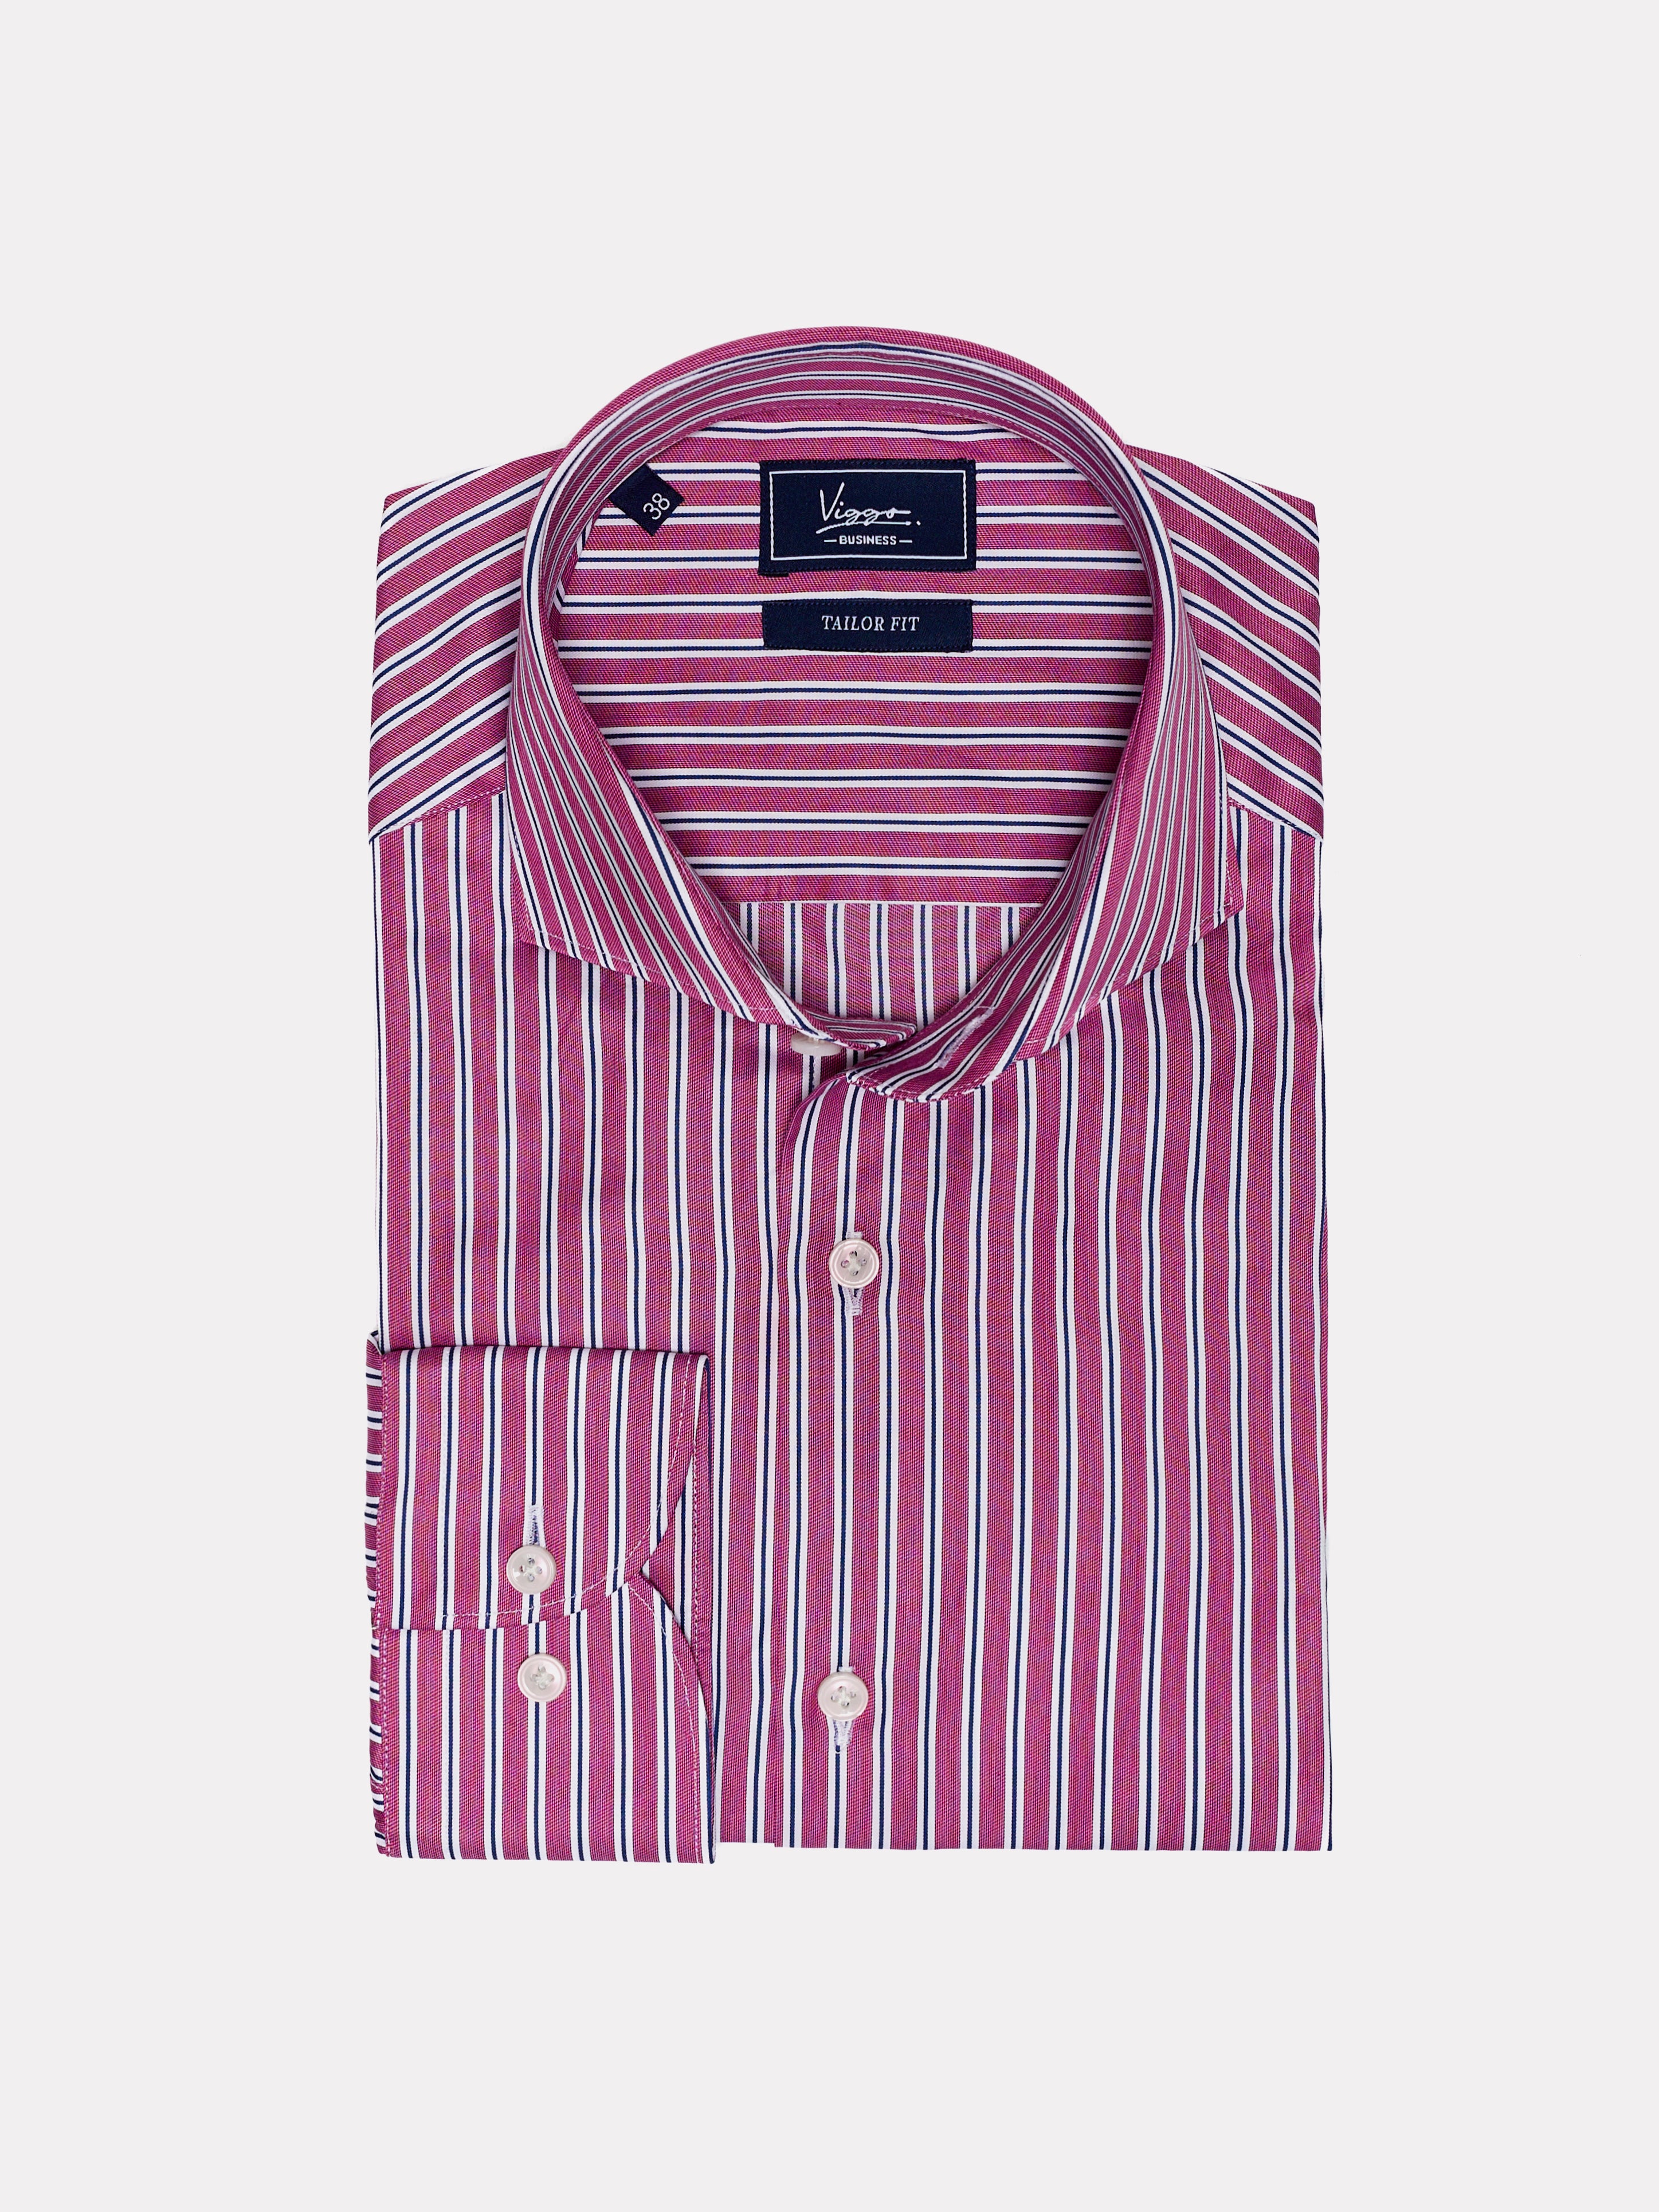 Pink shirt with white and navy stripes